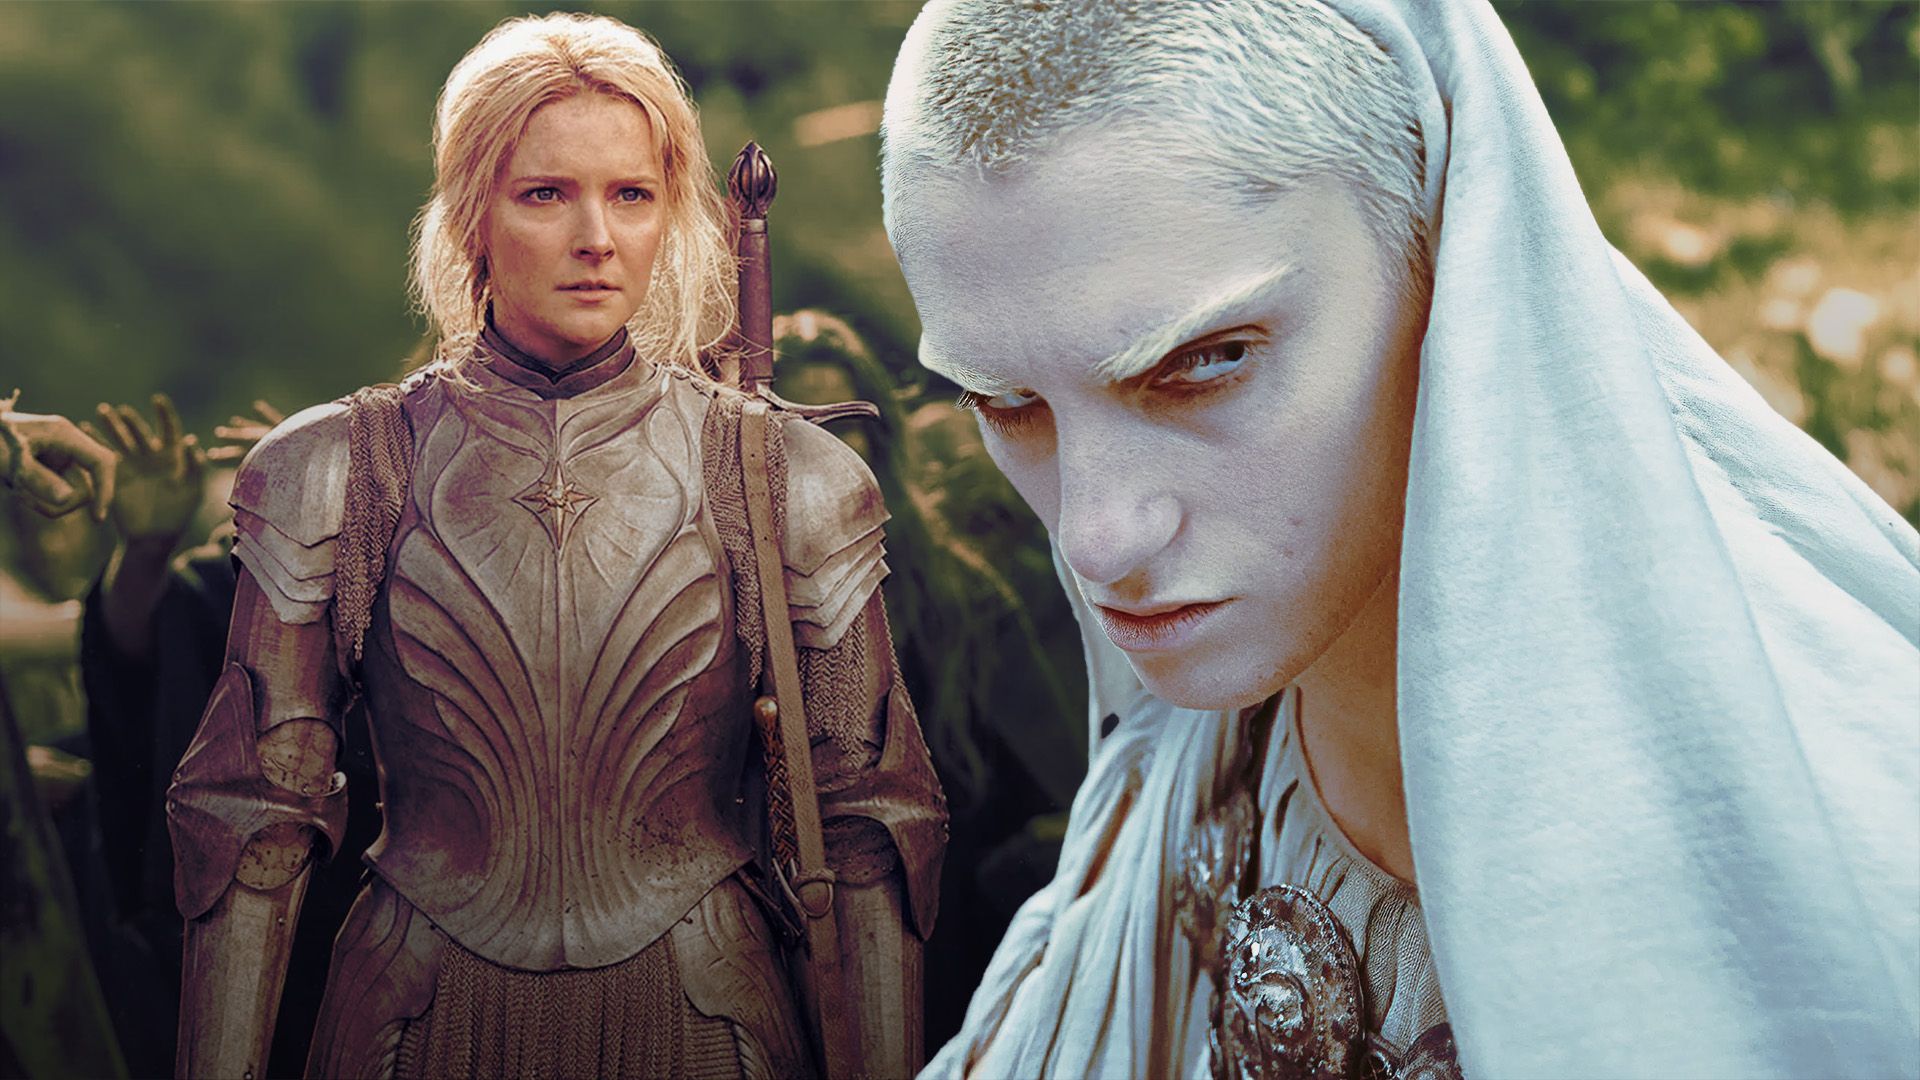 An edited image of Morfydd Clark as Galadriel and Bridie Sisson as The Dweller in The Rings of Power